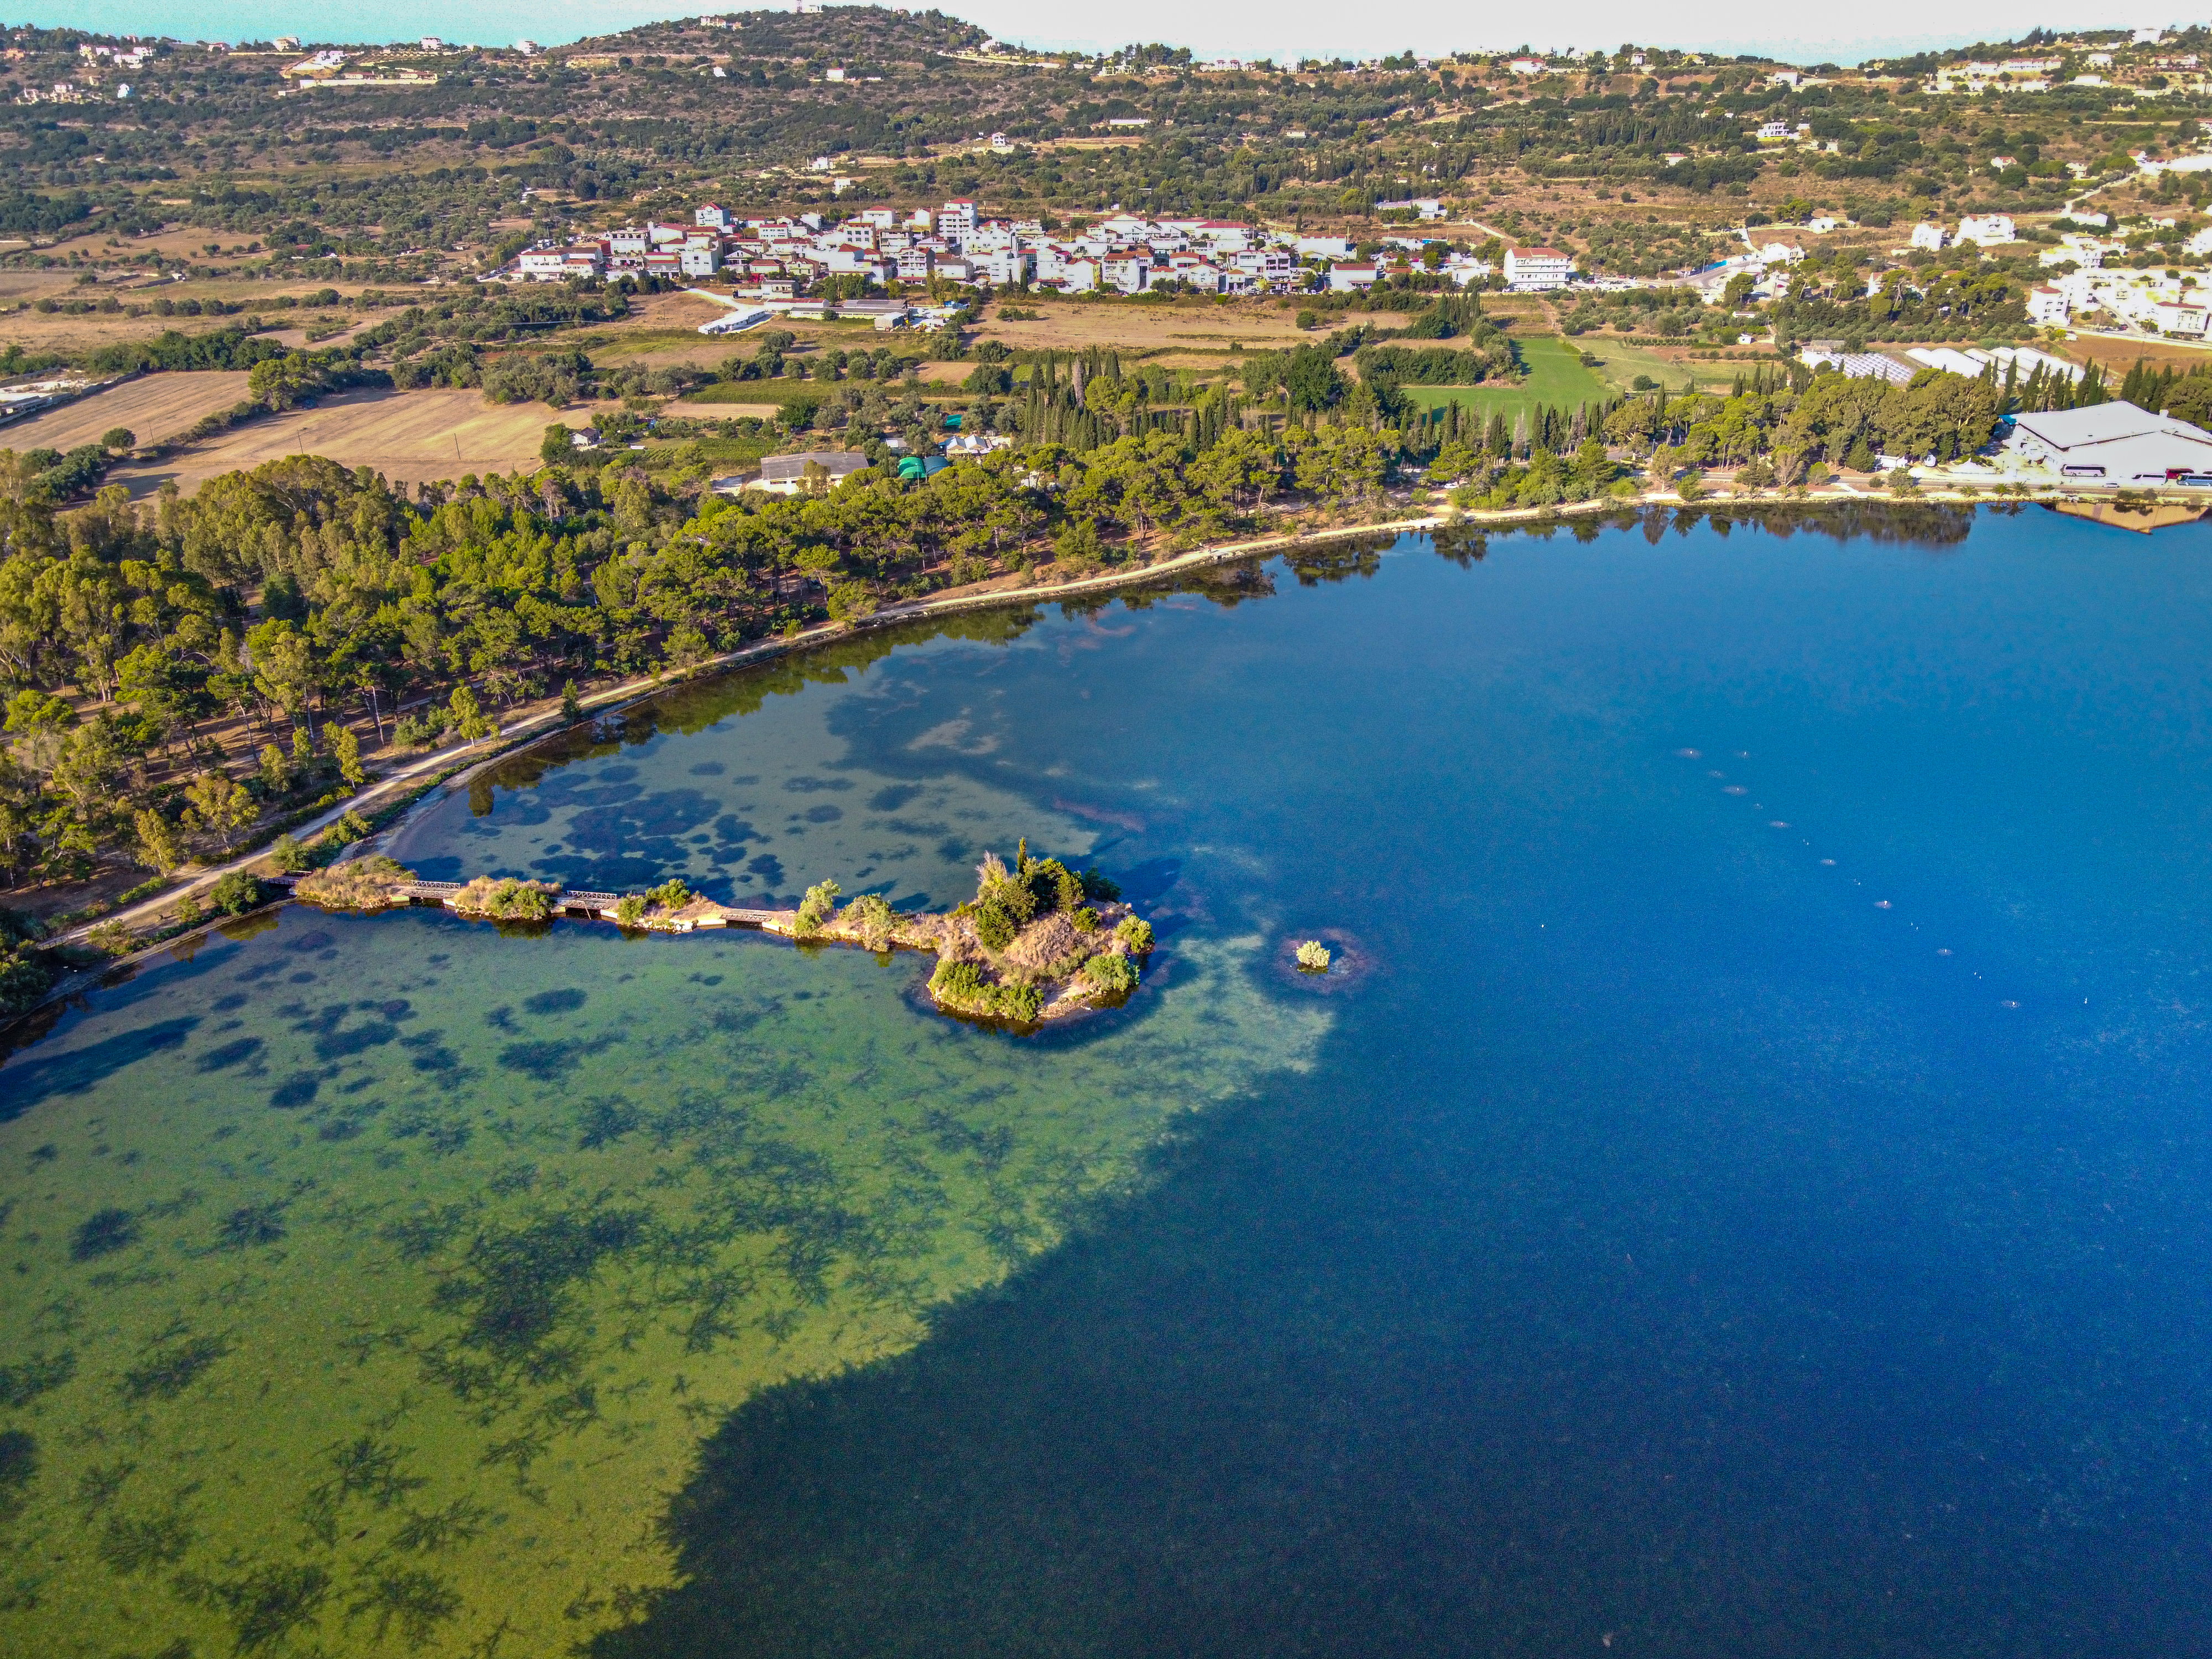 Panoramic view of Koutavos Lagoon from above